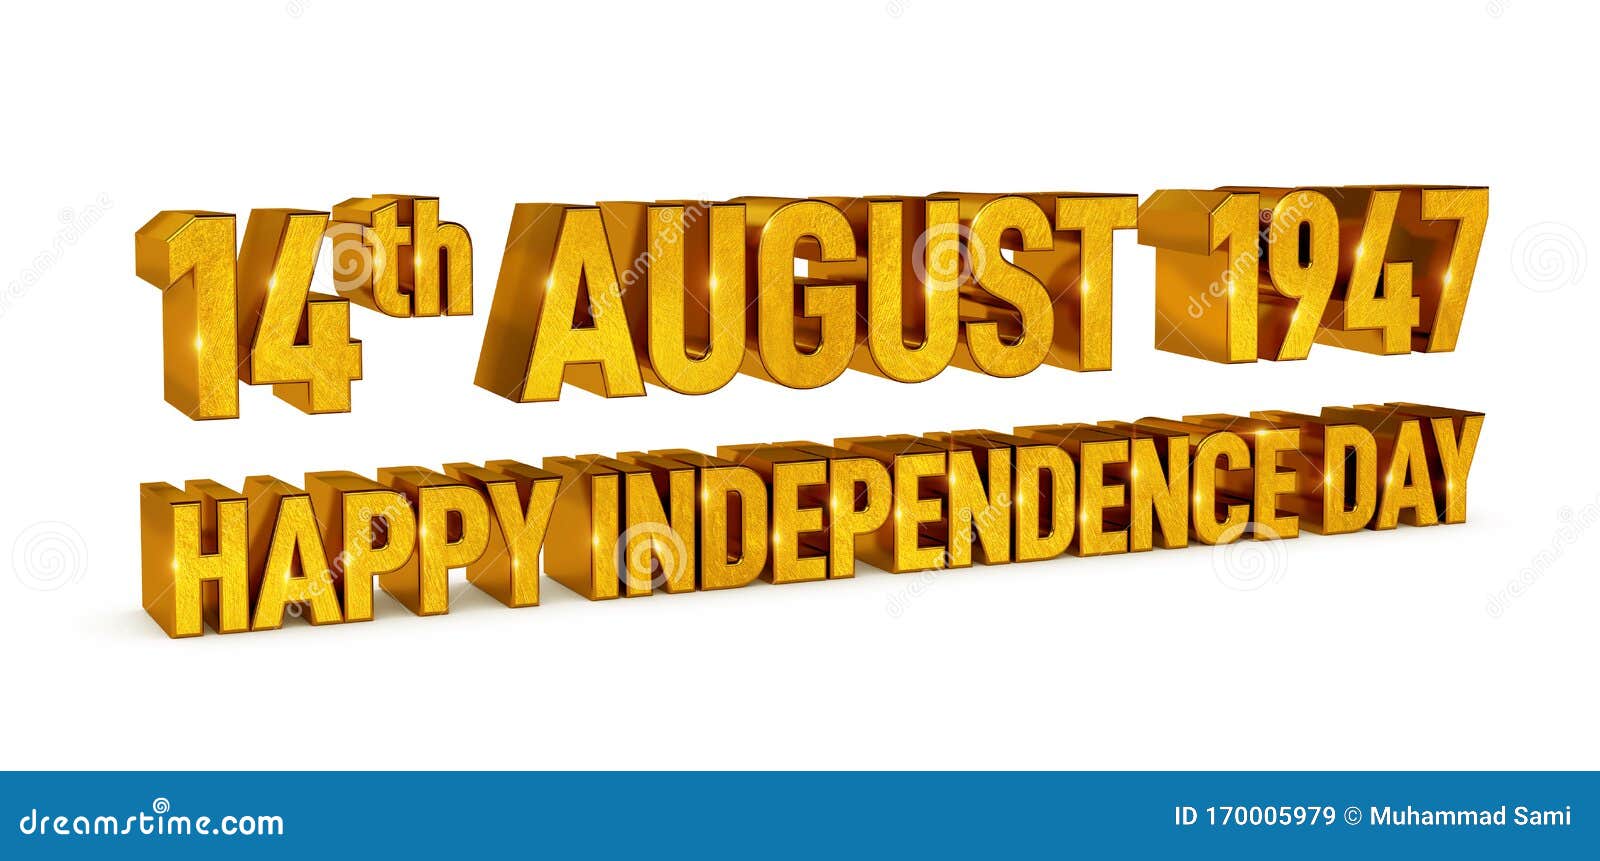 14th August 1947 Happy Independence Day 3d Render - Illustration ...